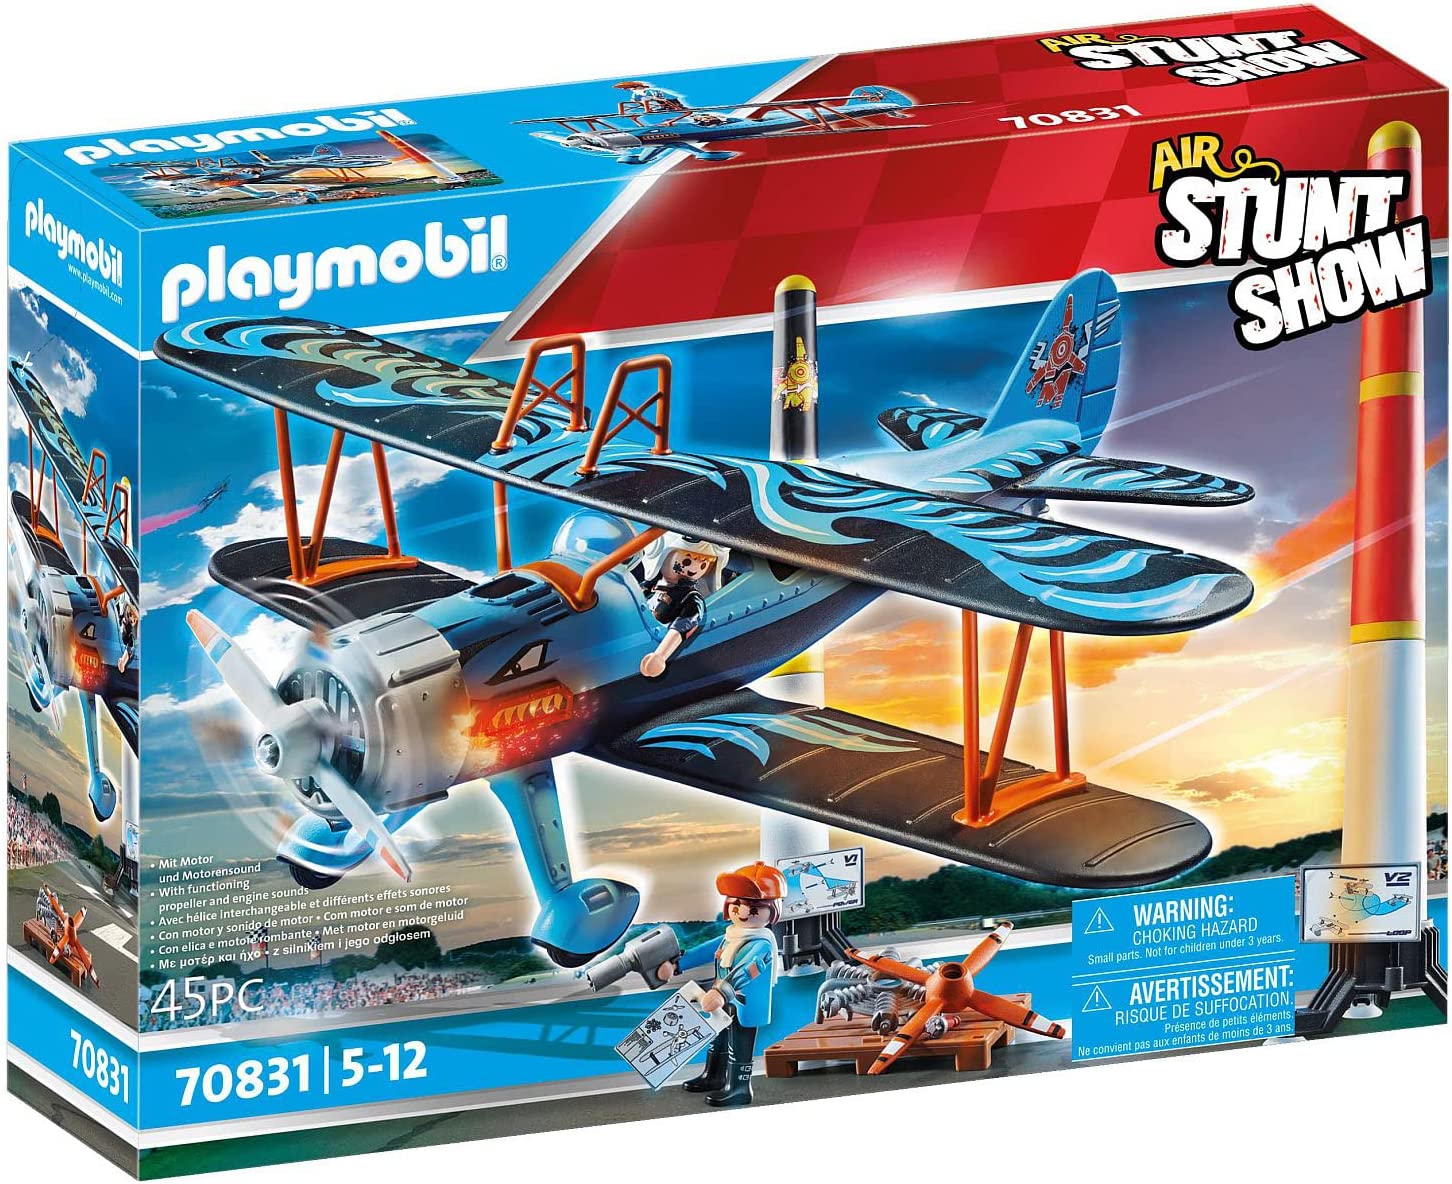 PLAYMOBIL Air Stunt Show 70831 Double Decker \"Phoönix\" with Electric Module for 5 Different Motor Noises and Turning the Propeller, for Children from 5 Years